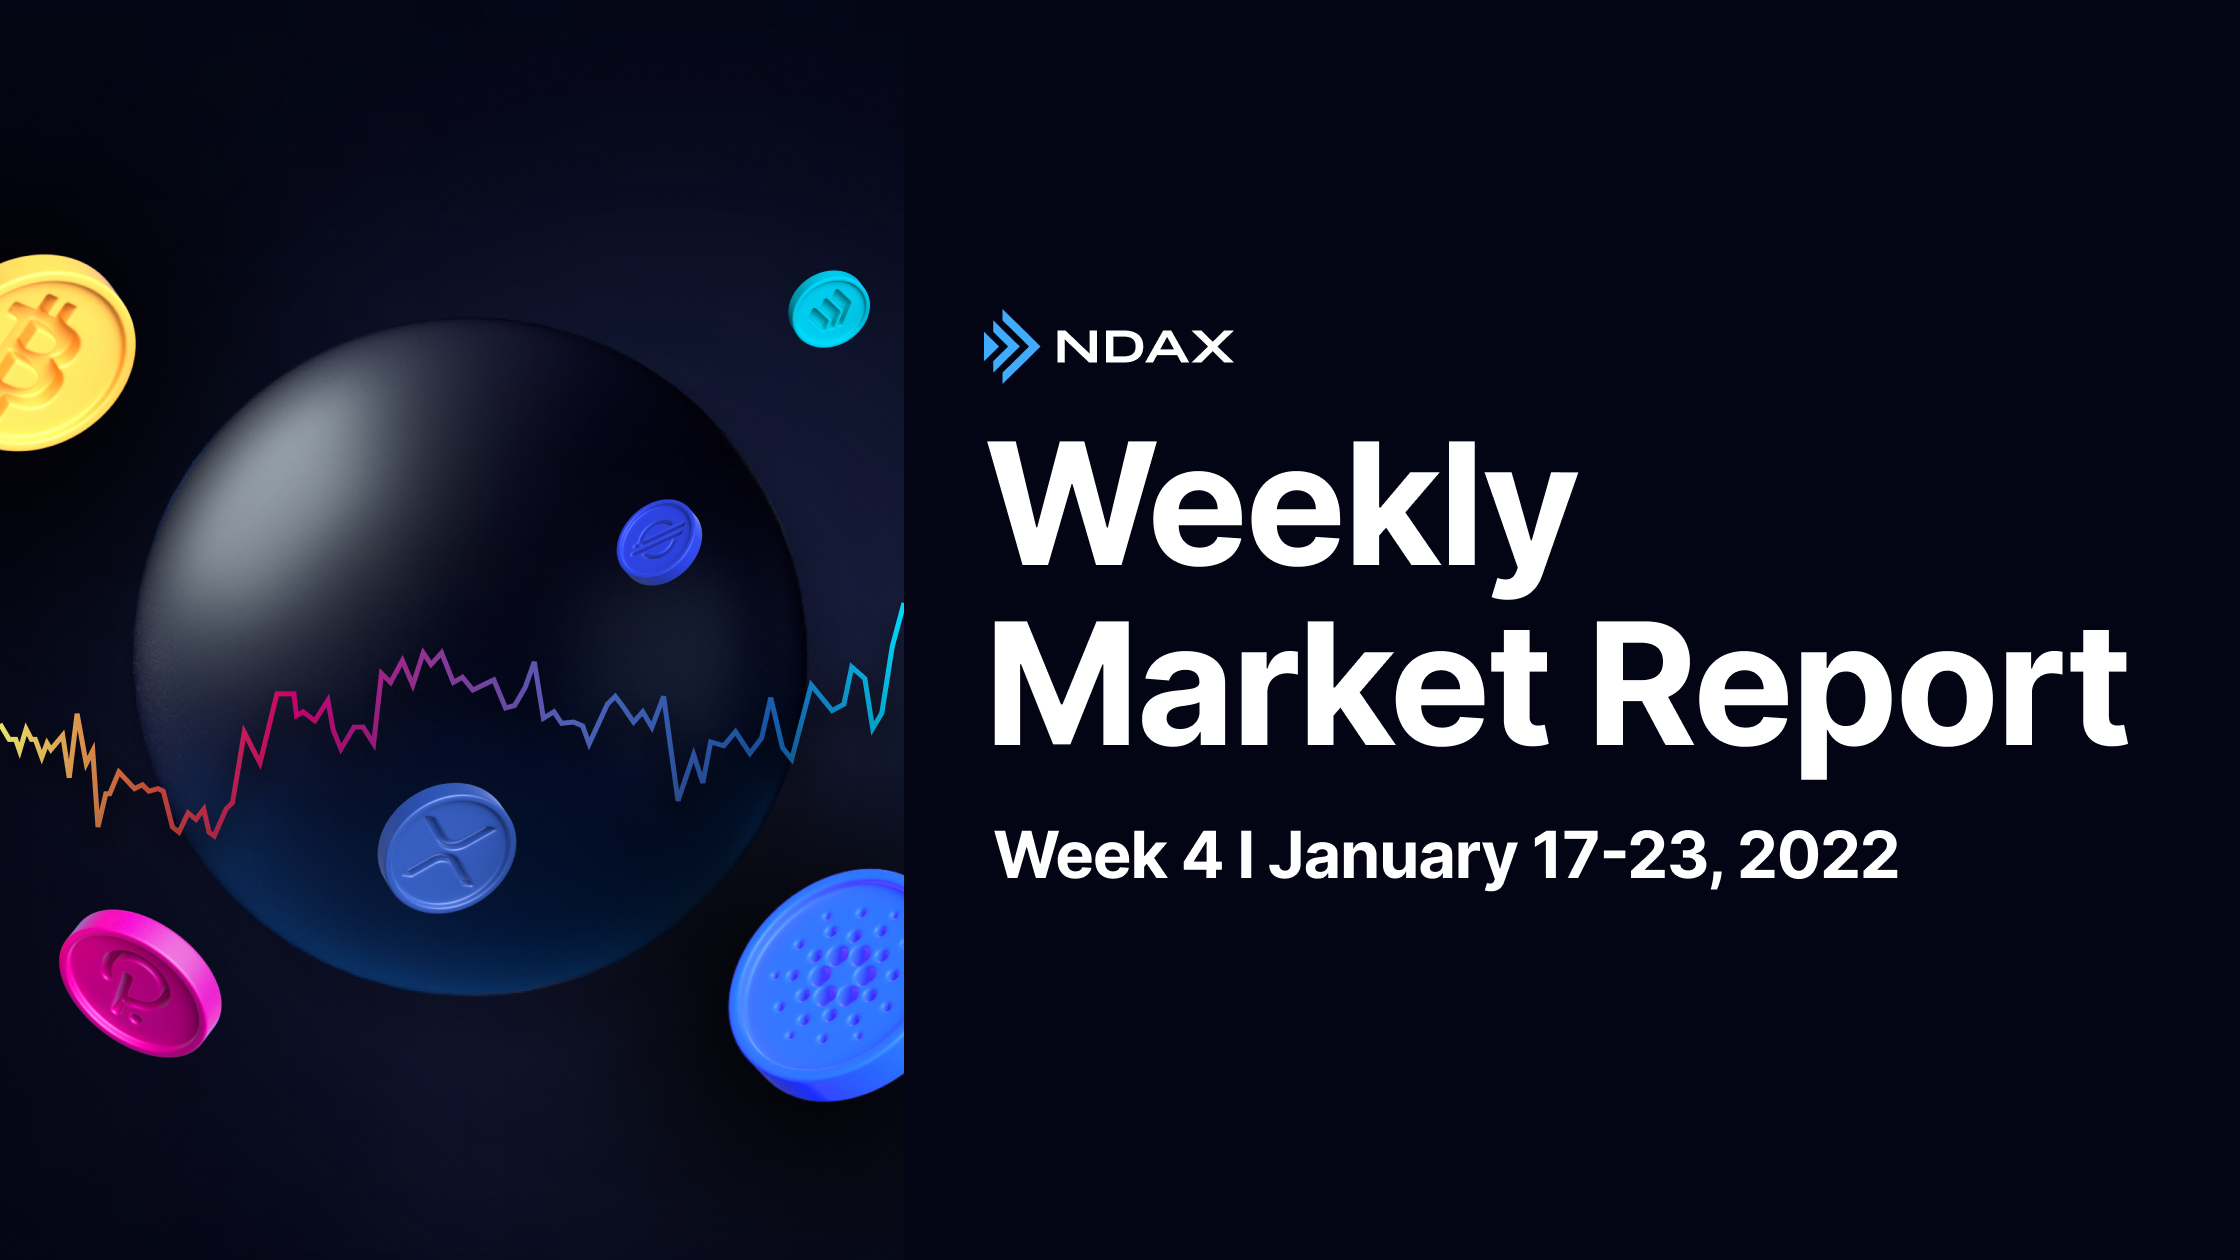 Weekly Crypto Market Report: Jan 17-23, 2022 - BTC, ETH, Stablecoins & More